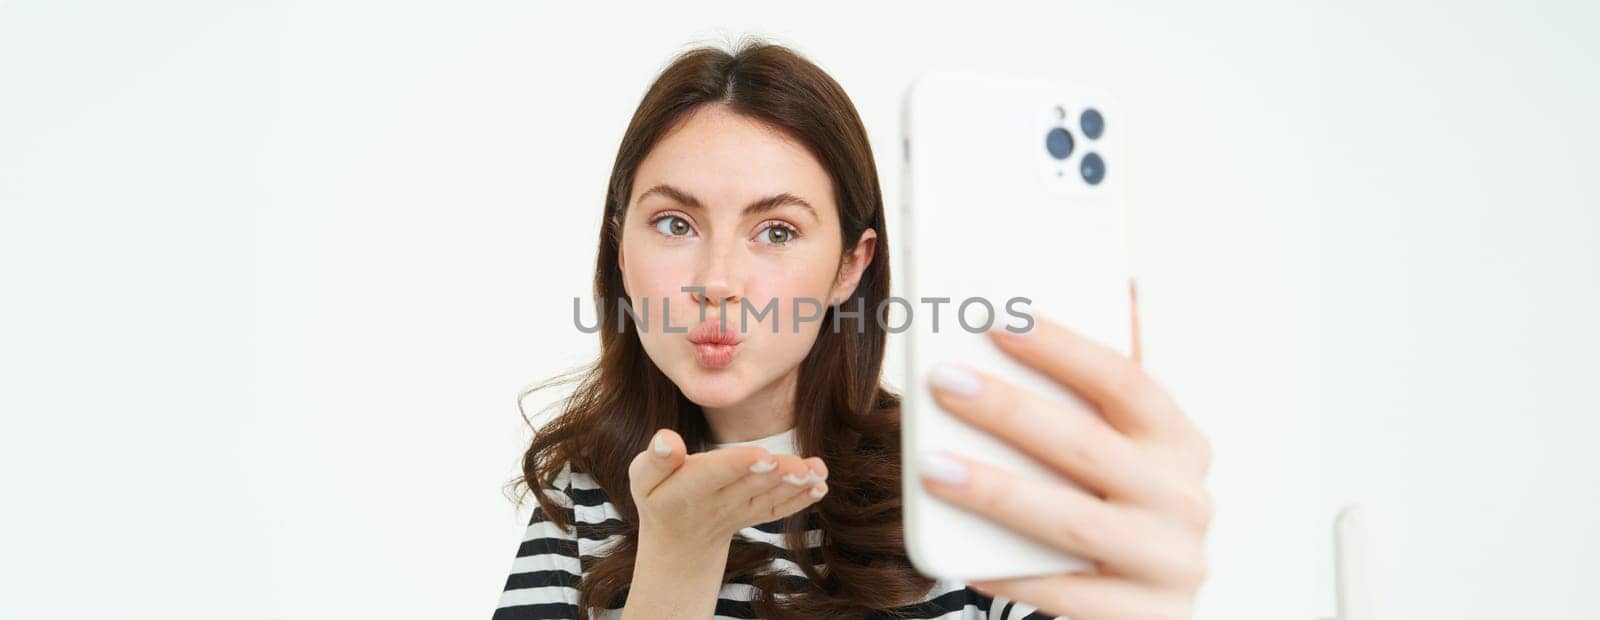 Portrait of young european woman taking selfie on smartphone, holding white mobile phone and posing for photos, isolated against white background by Benzoix